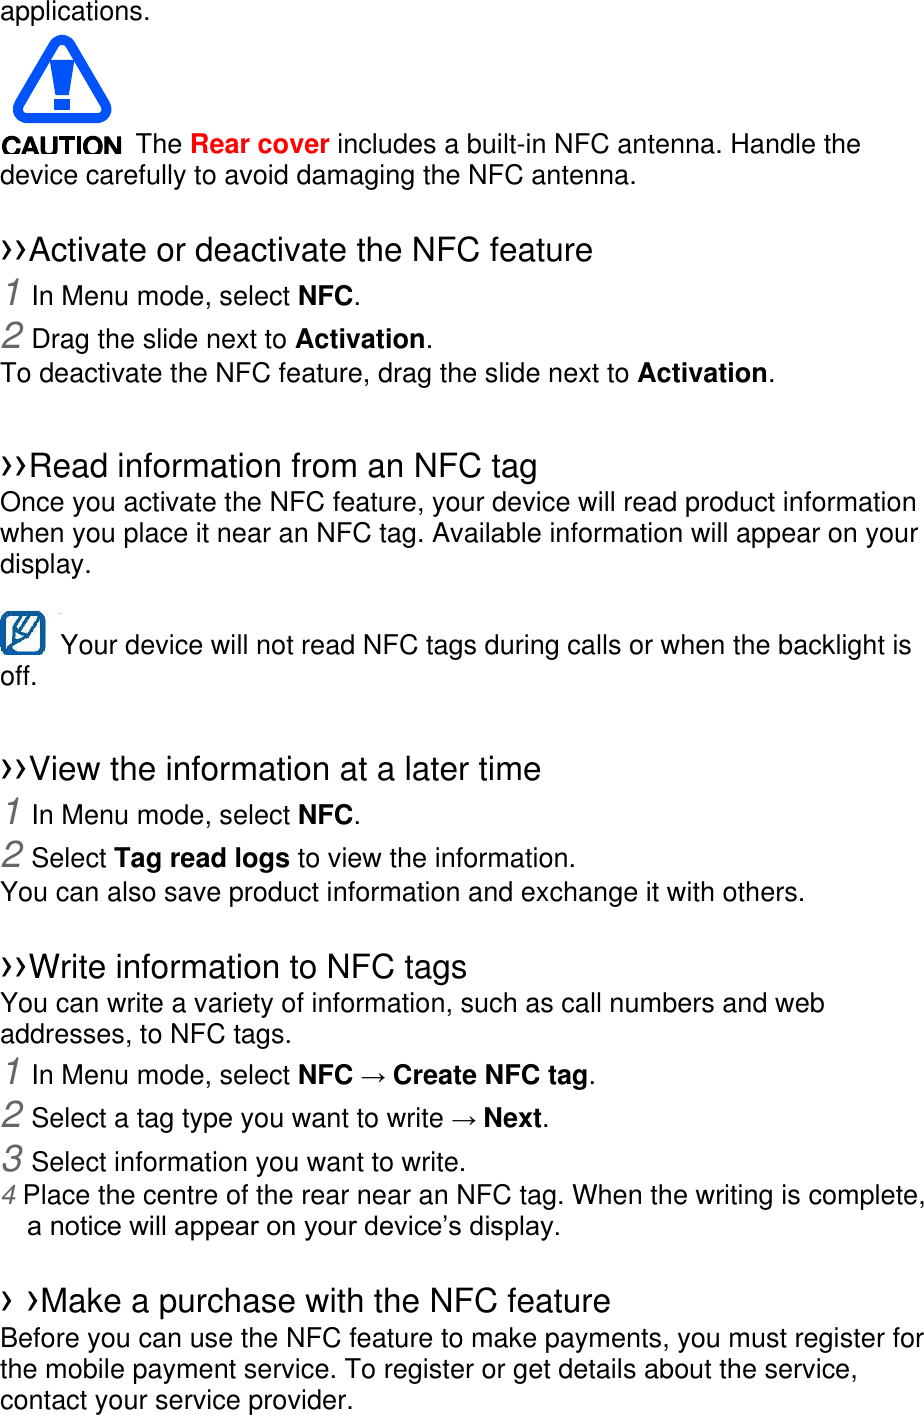 applications.    The Rear cover includes a built-in NFC antenna. Handle the device carefully to avoid damaging the NFC antenna.  ››Activate or deactivate the NFC feature 1 In Menu mode, select NFC. 2 Drag the slide next to Activation. To deactivate the NFC feature, drag the slide next to Activation.  ››Read information from an NFC tag Once you activate the NFC feature, your device will read product information when you place it near an NFC tag. Available information will appear on your display.  Your device will not read NFC tags during calls or when the backlight is   off.  ››View the information at a later time 1 In Menu mode, select NFC. 2 Select Tag read logs to view the information. You can also save product information and exchange it with others.  ››Write information to NFC tags   You can write a variety of information, such as call numbers and web addresses, to NFC tags. 1 In Menu mode, select NFC → Create NFC tag. 2 Select a tag type you want to write → Next. 3 Select information you want to write. 4 Place the centre of the rear near an NFC tag. When the writing is complete, a notice will appear on your device’s display.  › ›Make a purchase with the NFC feature   Before you can use the NFC feature to make payments, you must register for the mobile payment service. To register or get details about the service, contact your service provider. 